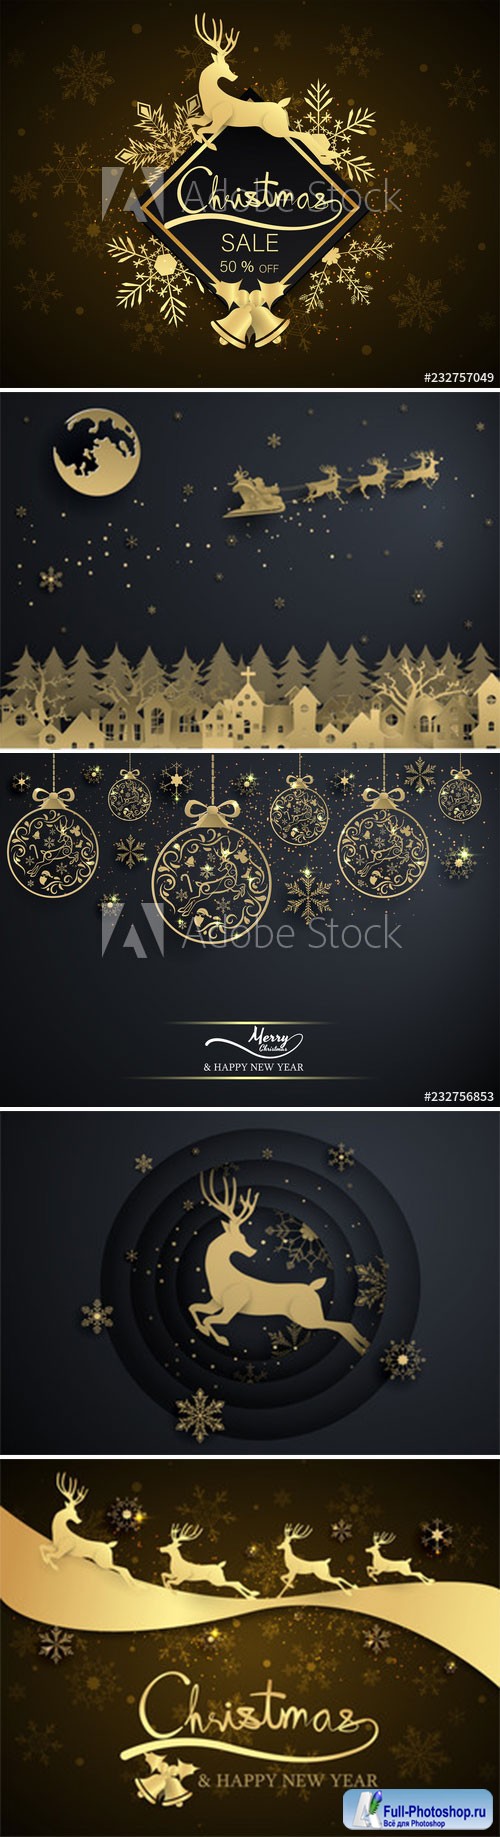 Gold snowflake and decoration christmas ball on black background, merry christmas, happy new year